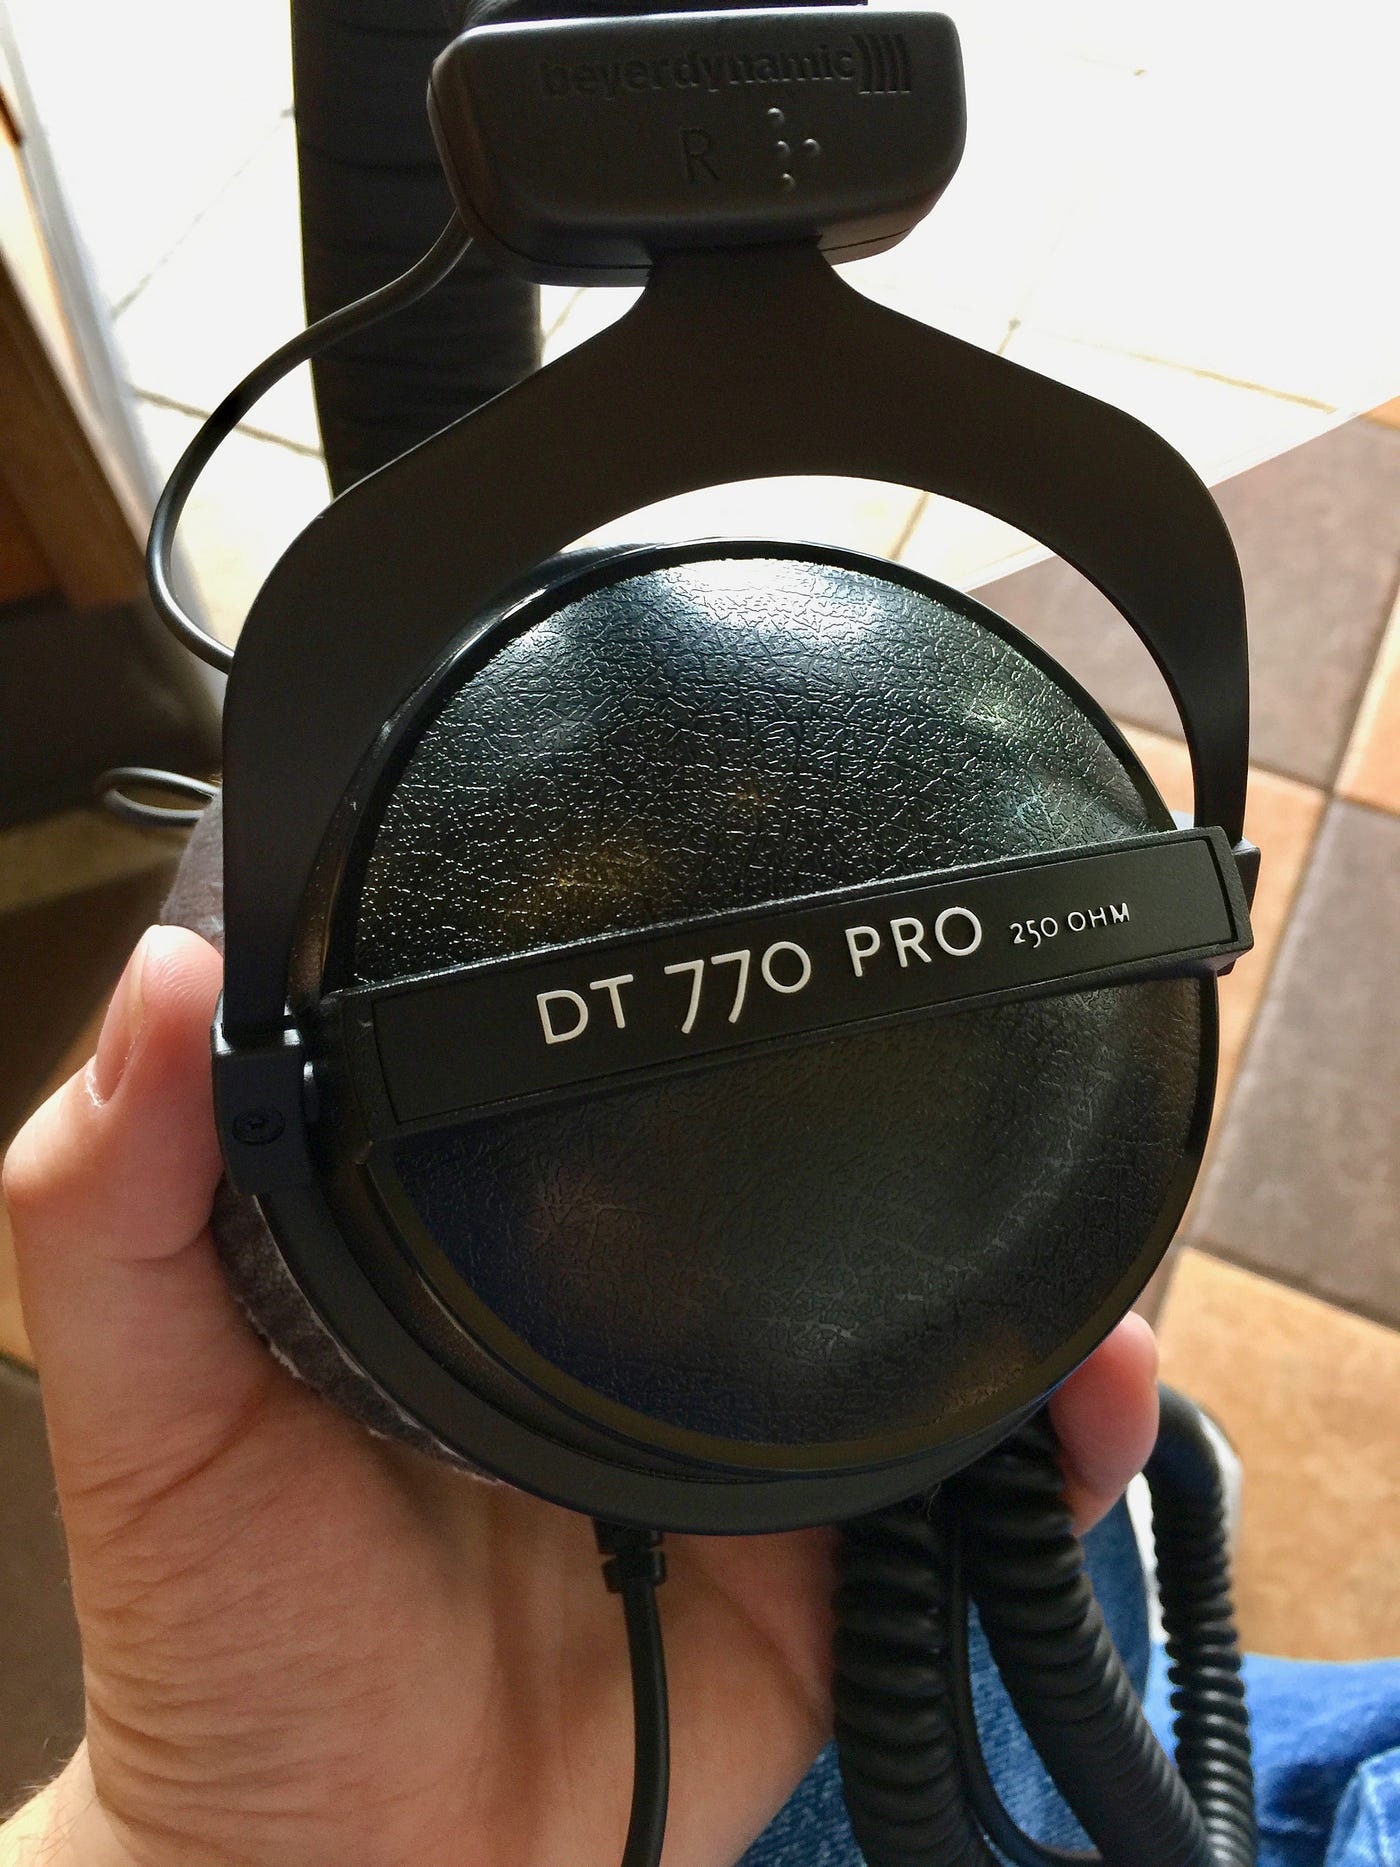 beyerdynamic DT 770 Pro Studio Headphones - Over-Ear, Closed-Back,  Professional Design for Recording and Monitoring (80 Ohm, Grey)